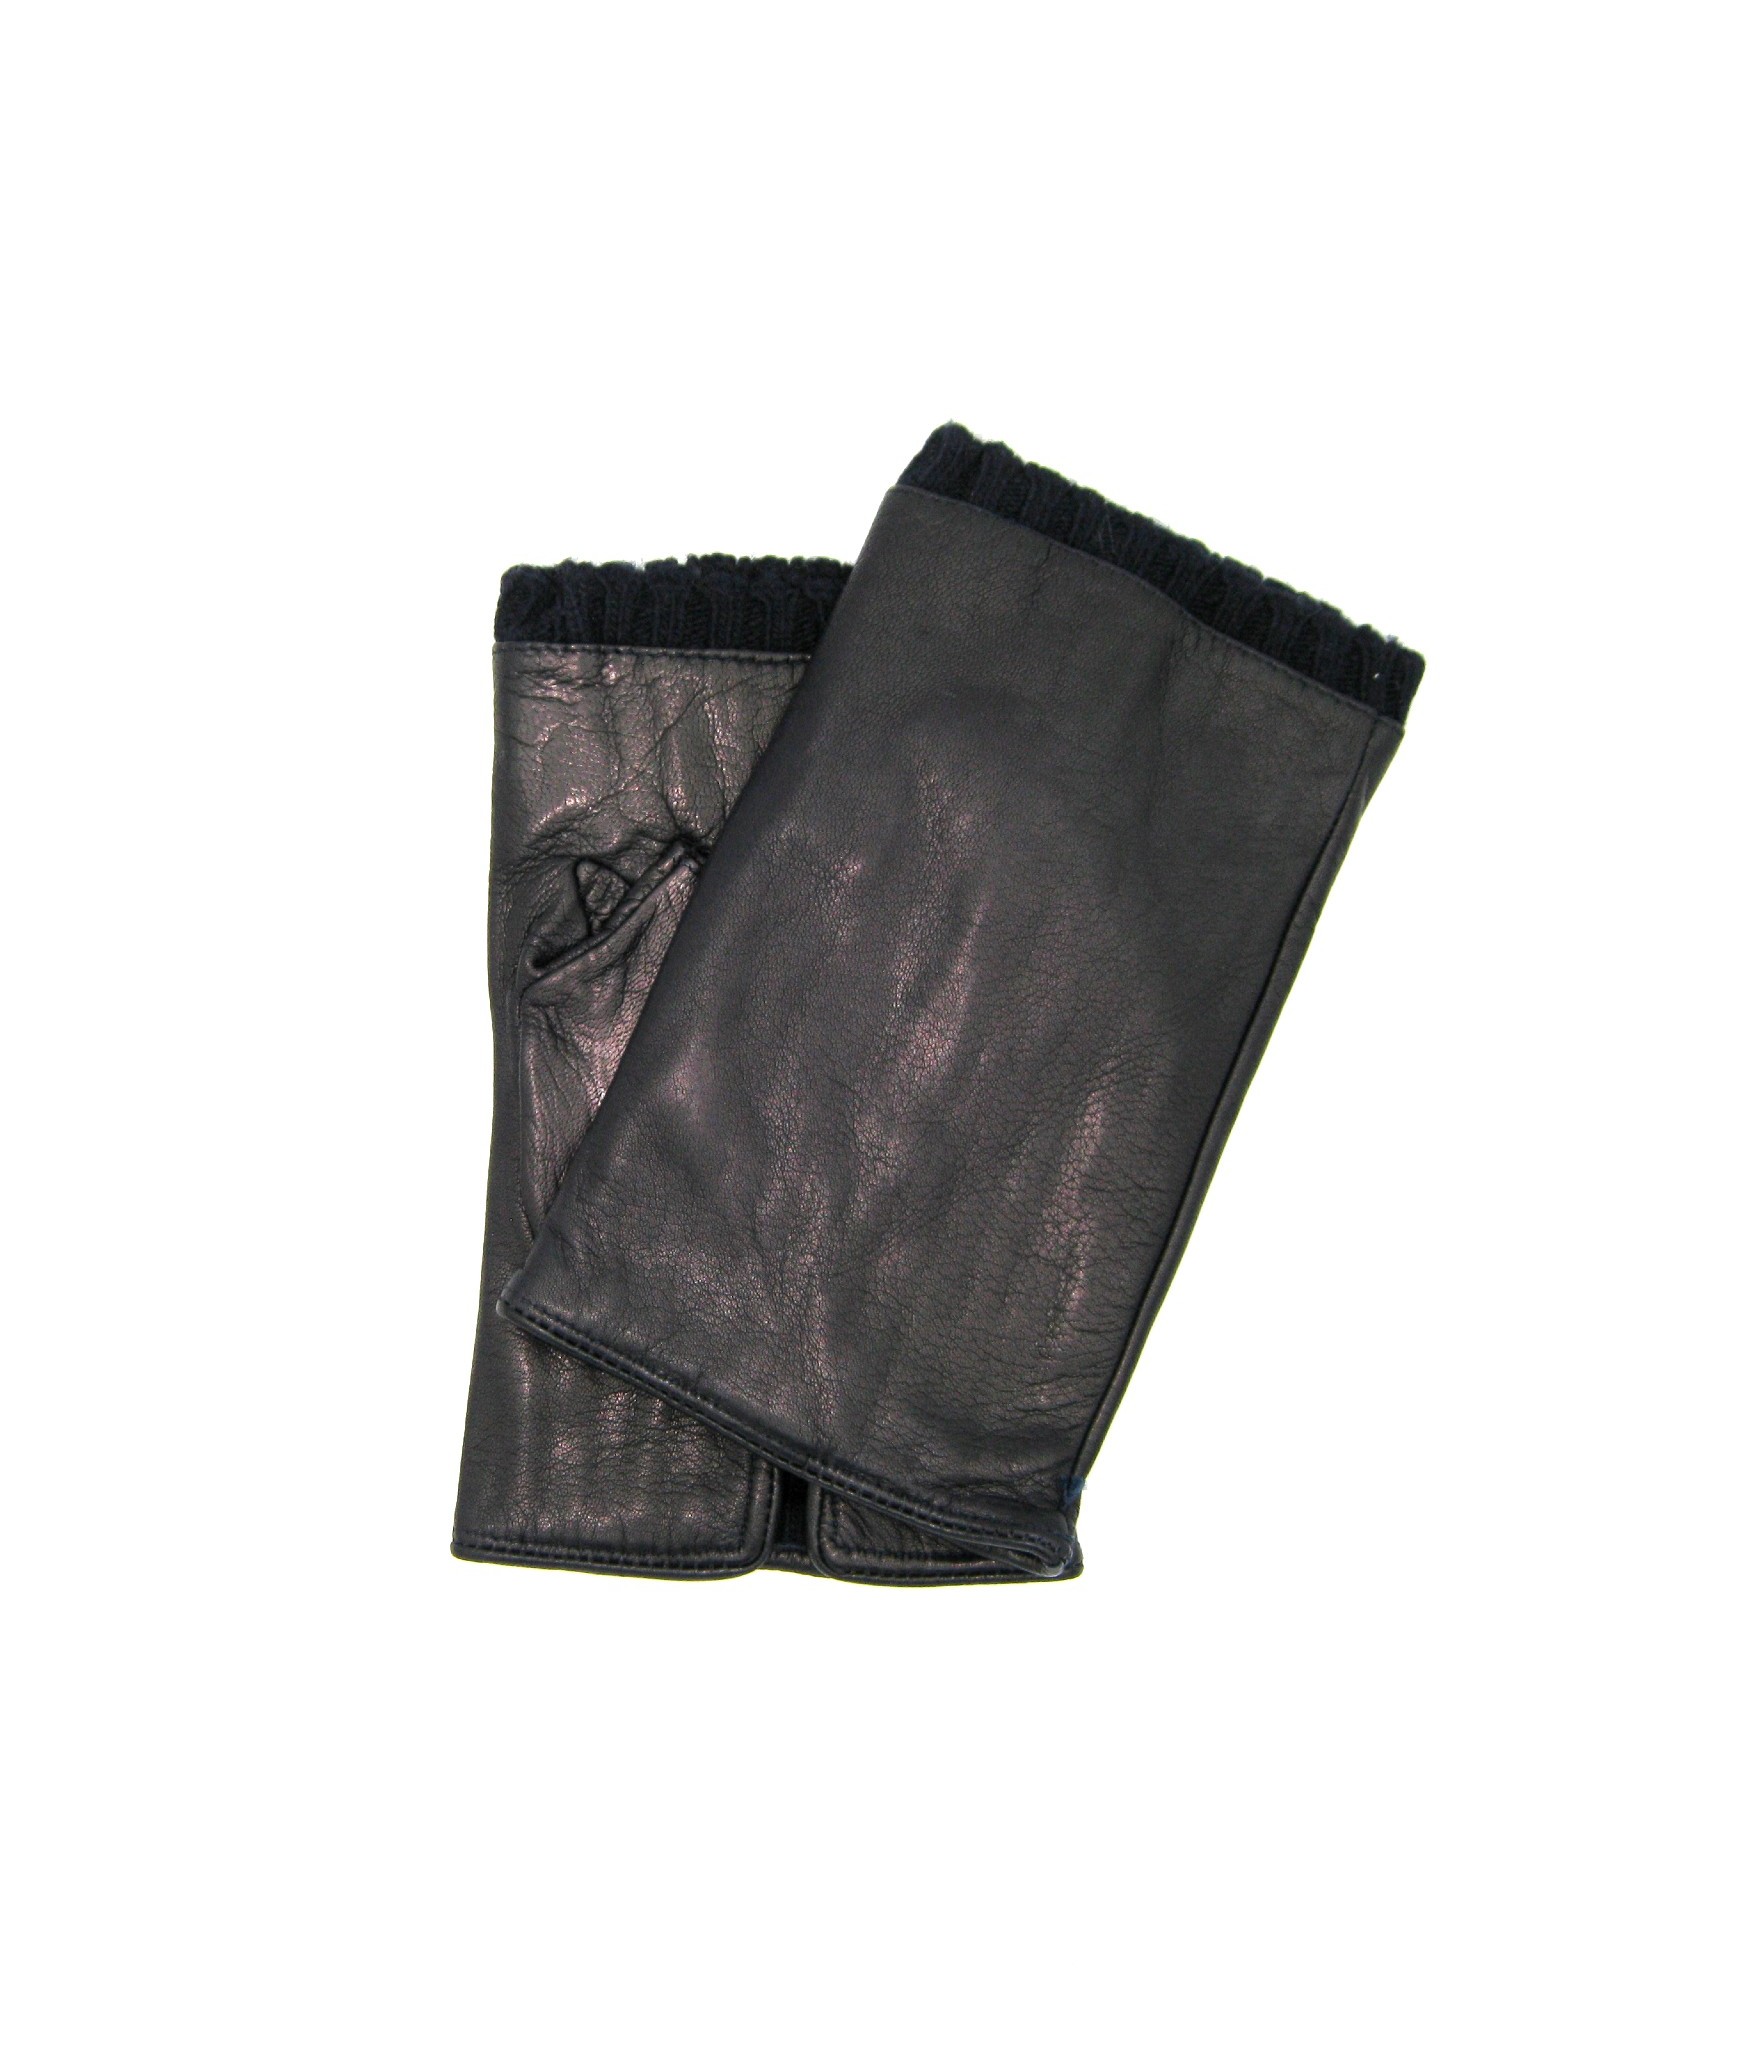 Home Uomo Half Mitten in Nappa leather cashmere lined Black